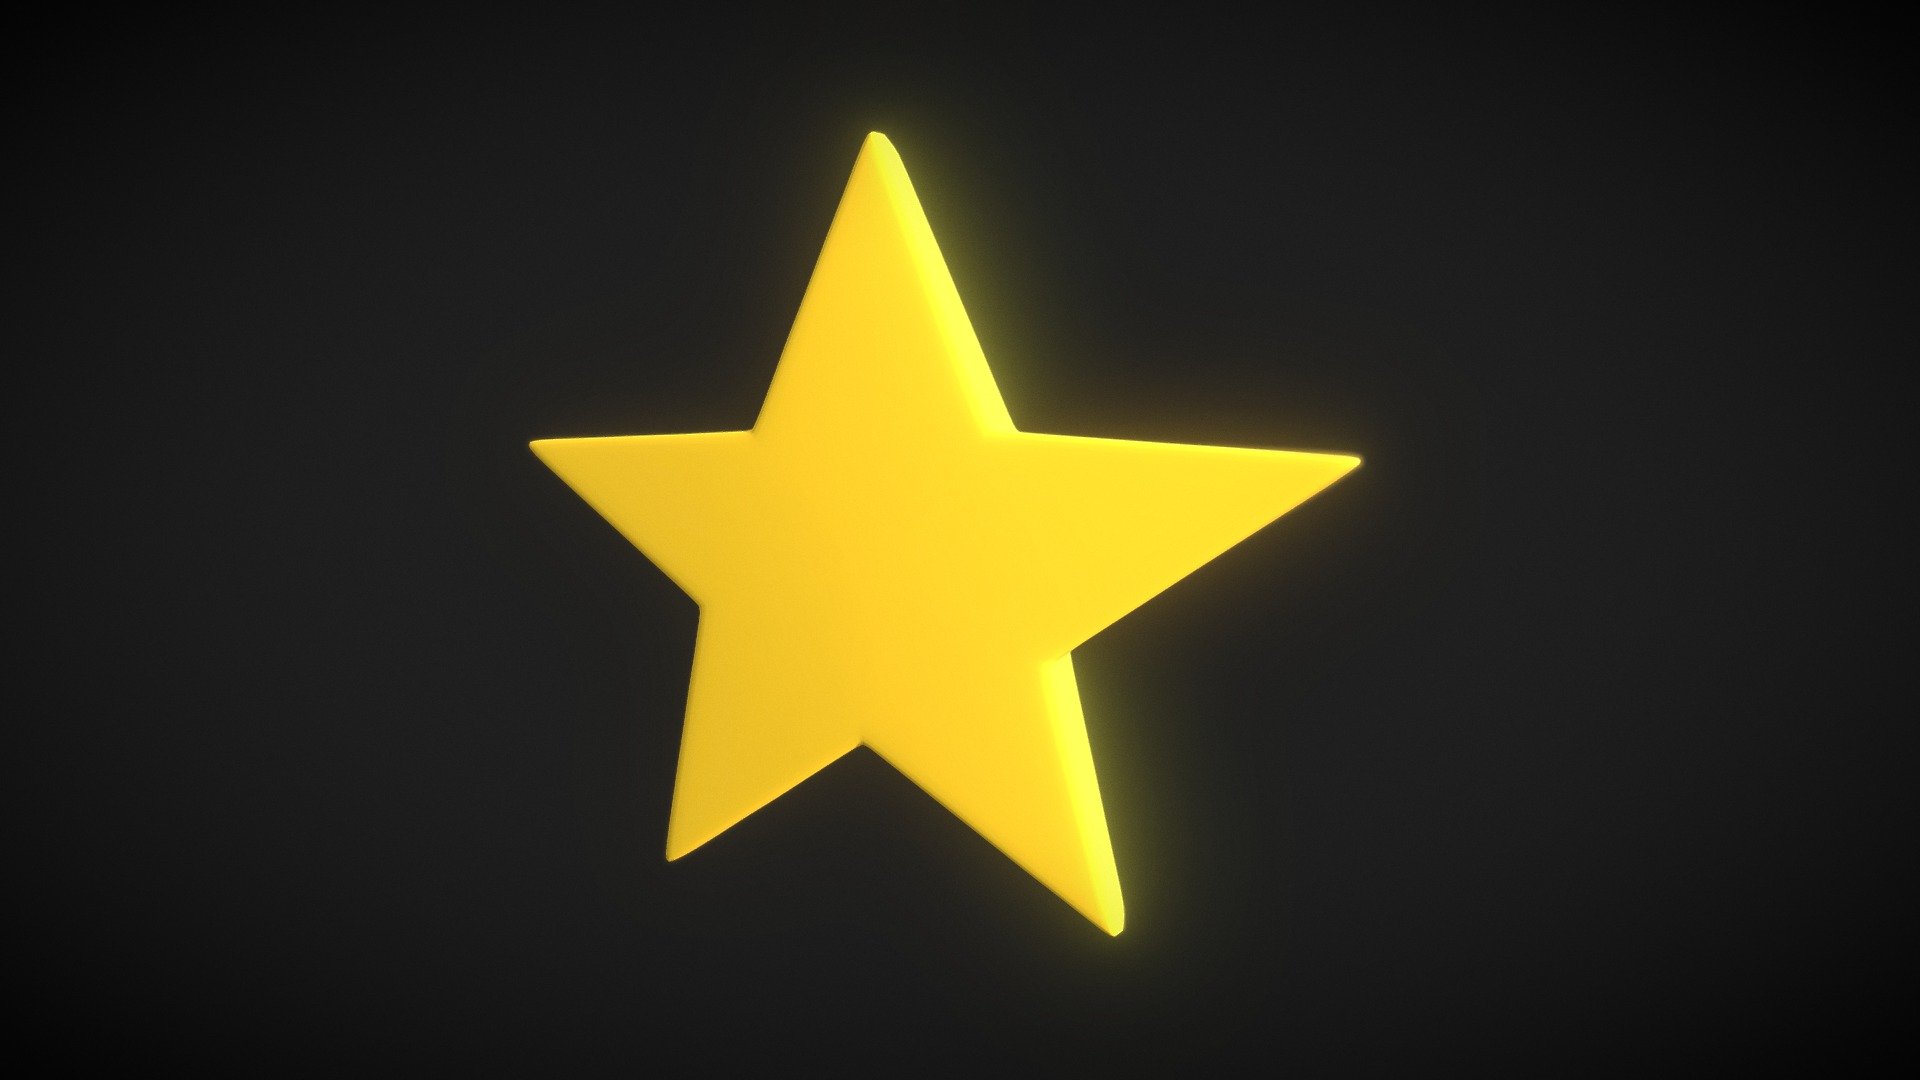 This is a simple star model. I created it in Maya 3d model